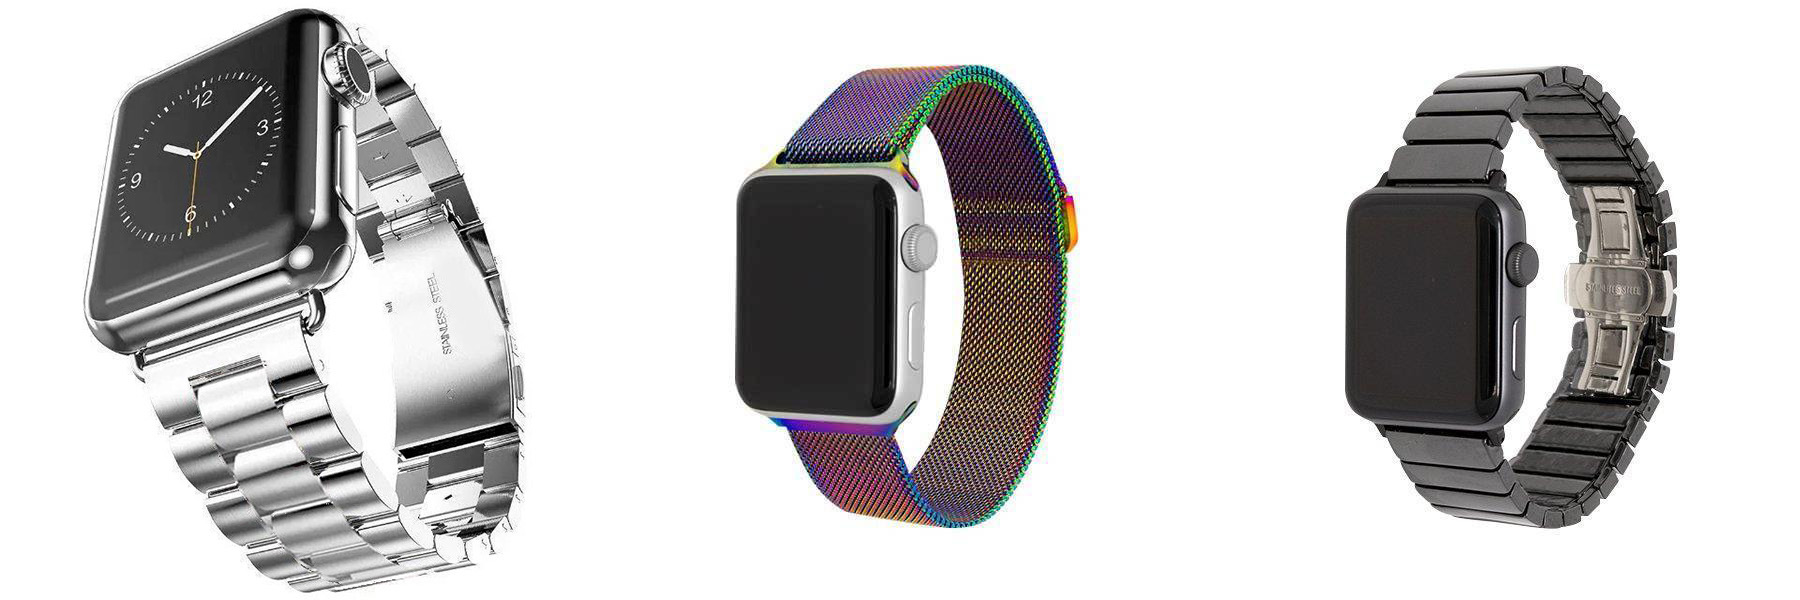 Epic Watch Bands Stainless Steel Link Apple Watch Bands